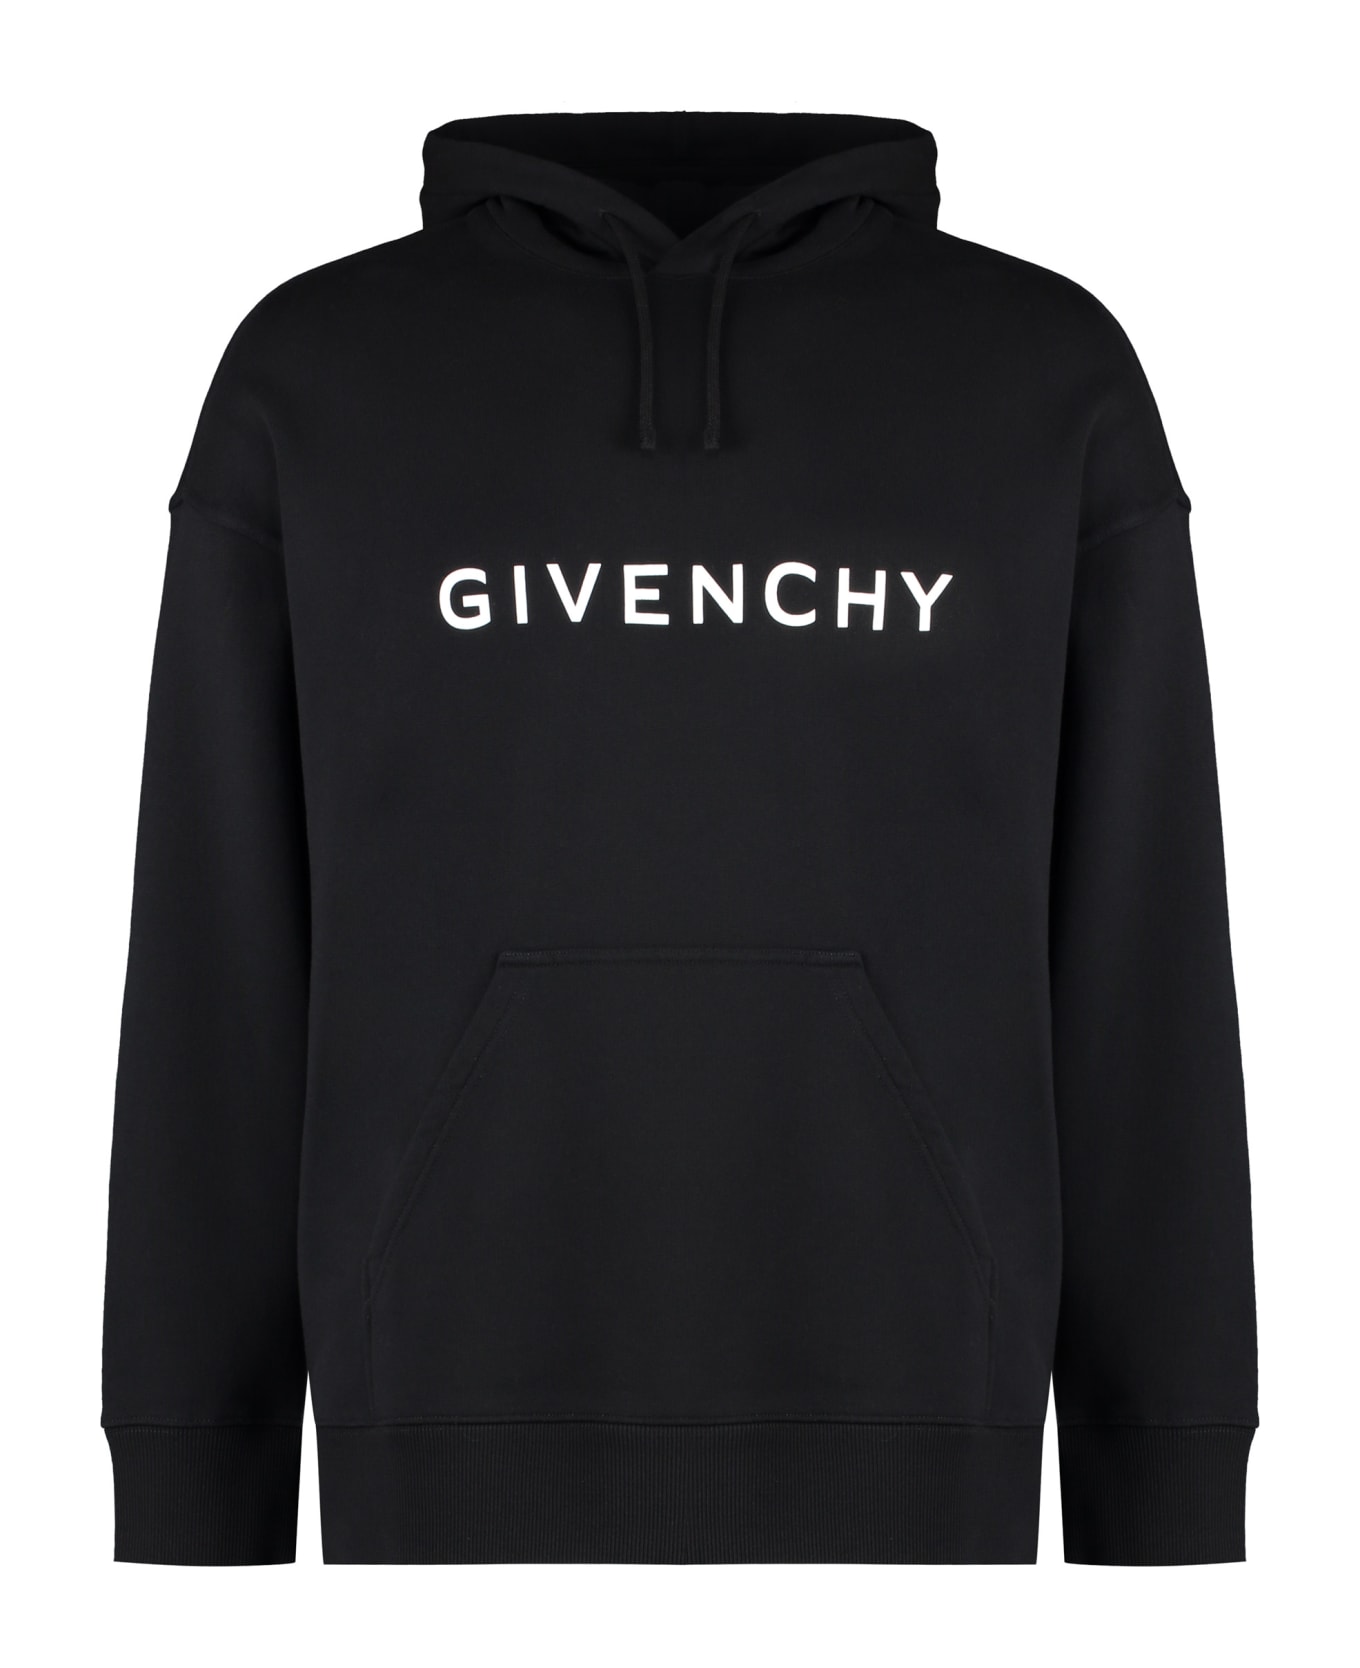 Givenchy Cotton Hoodie - Black